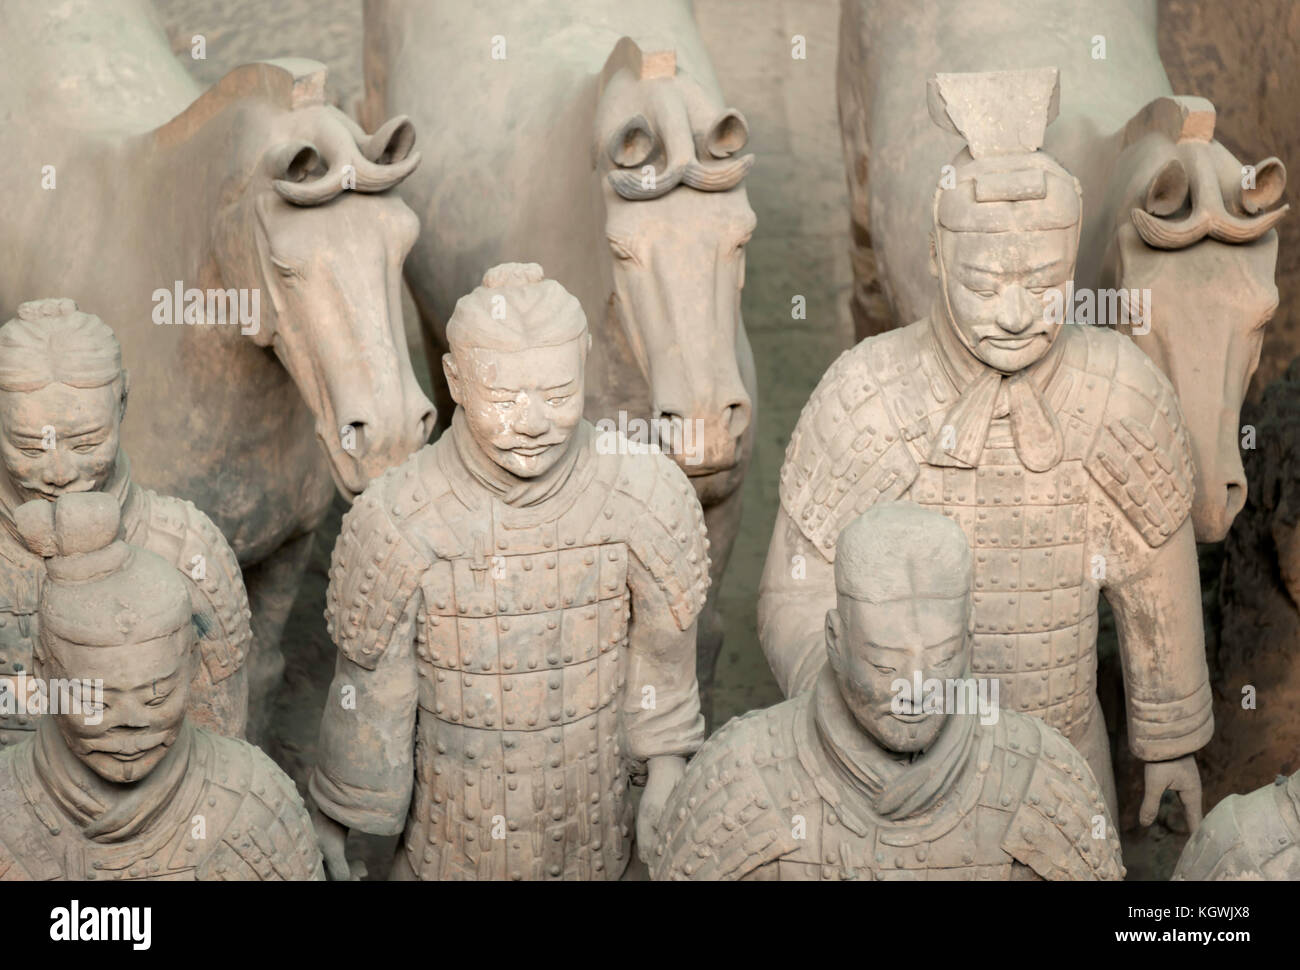 Closeup of some of the Terra Cotta Warriors from Emperor Qin Shihuangdi's tomb. Stock Photo